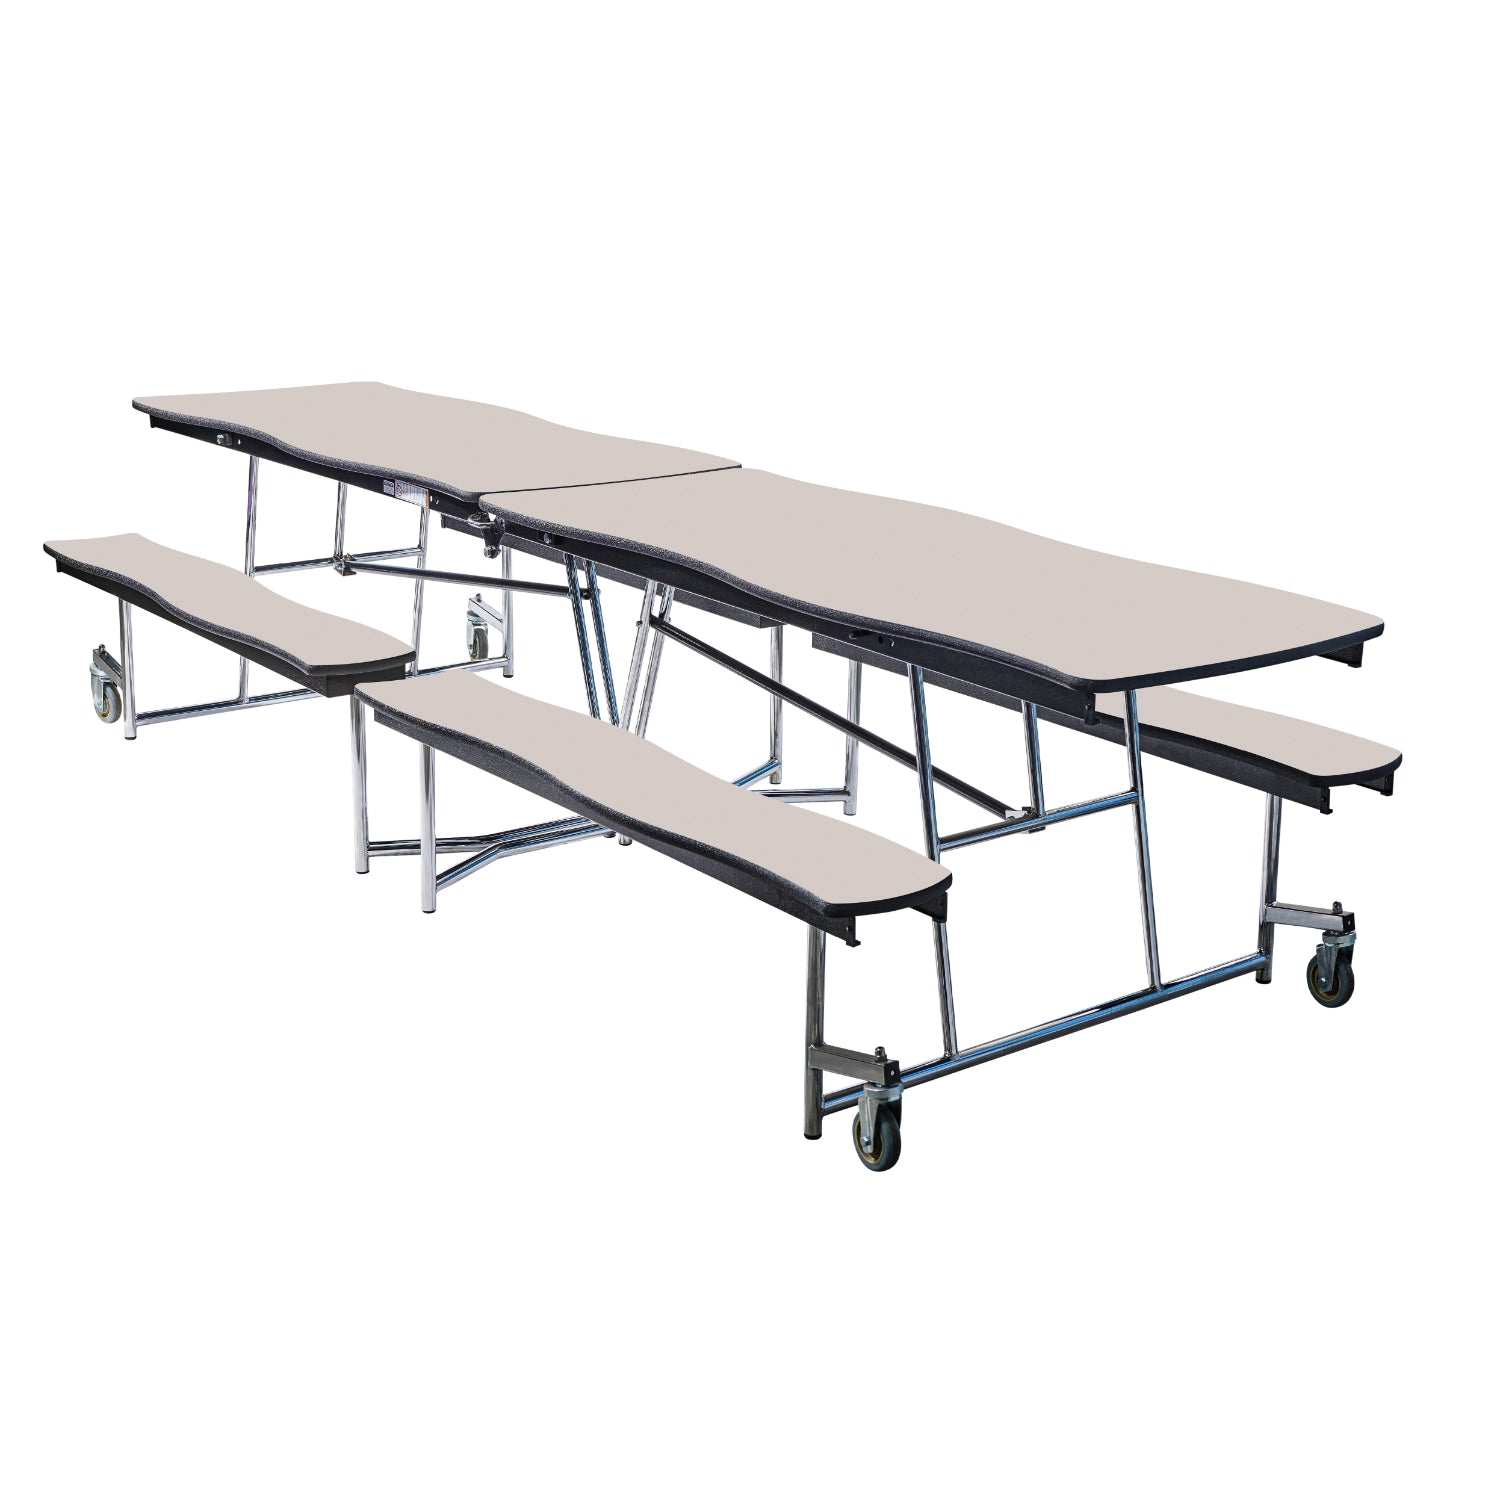 Mobile Cafeteria Table with Benches, 10' Swerve, Plywood Core, Vinyl T-Mold Edge, Chrome Frame